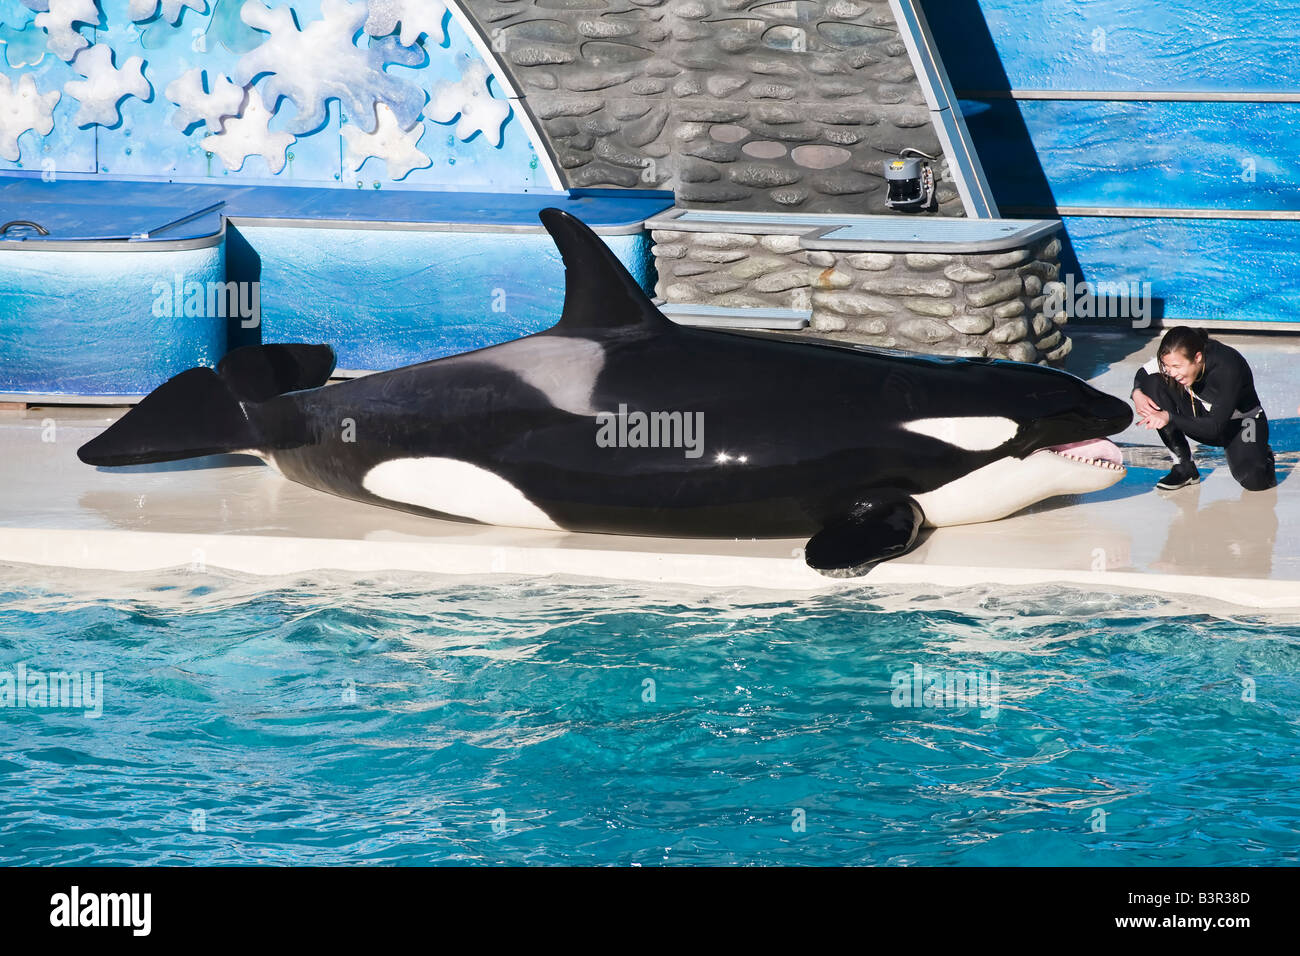 A killer Whale lying clear out of the pool on the side of the aquarium during the show Stock Photo